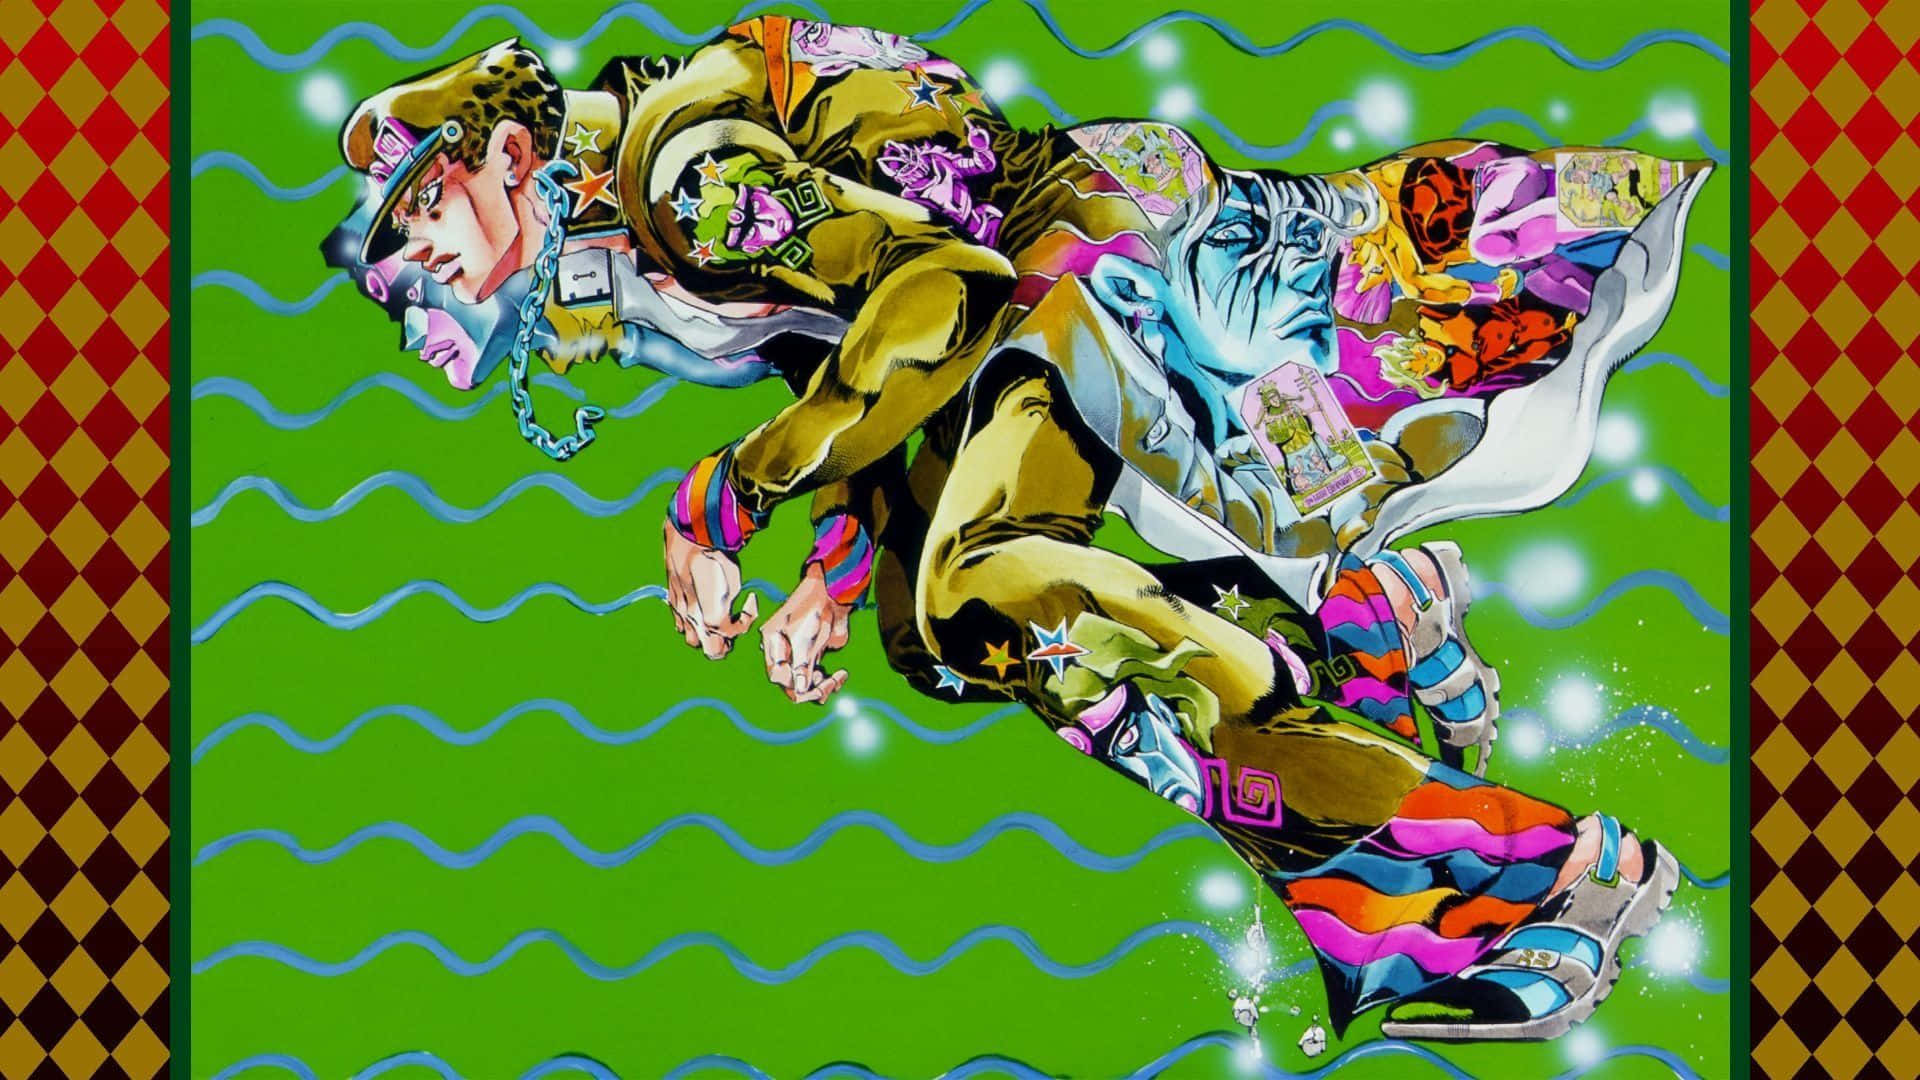 "Bring on the adventure with Jotaro and Dio, featured in Jojo's Bizarre Adventure manga series." Wallpaper